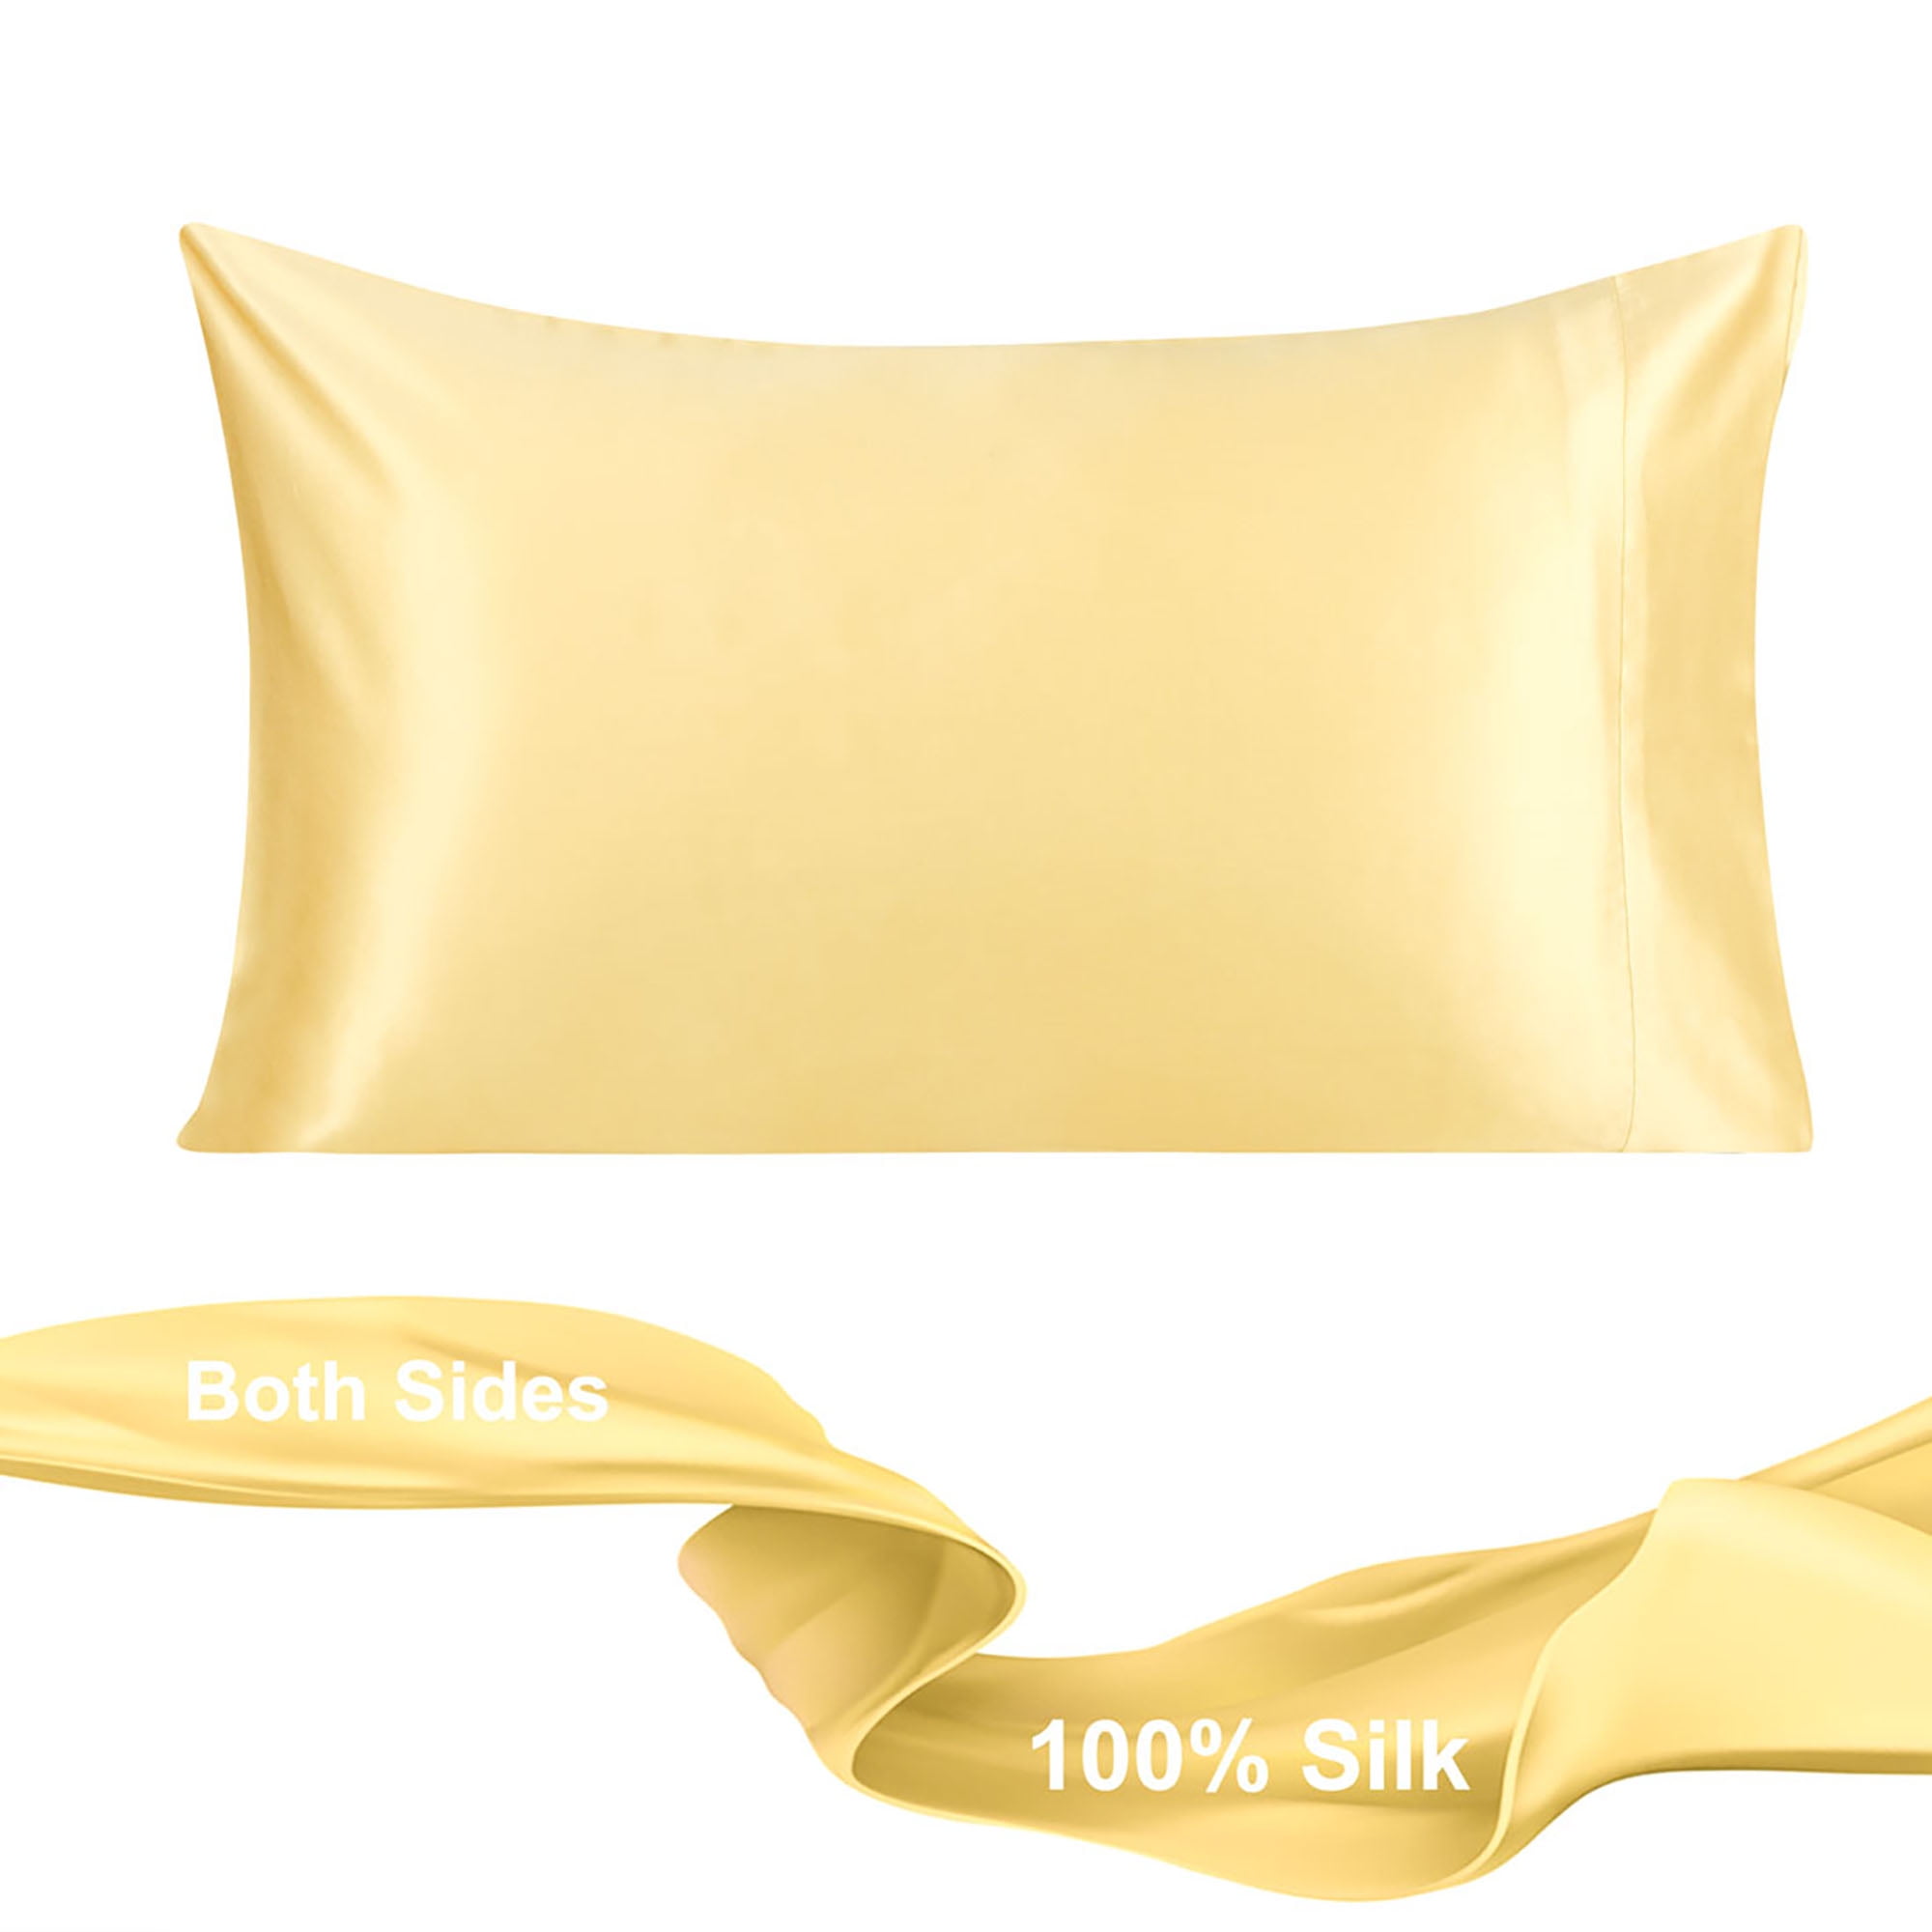 Details about   100% Natural Silk Pillowcase Hair Beauty Printed Pillow Towel for Healthy Sleep